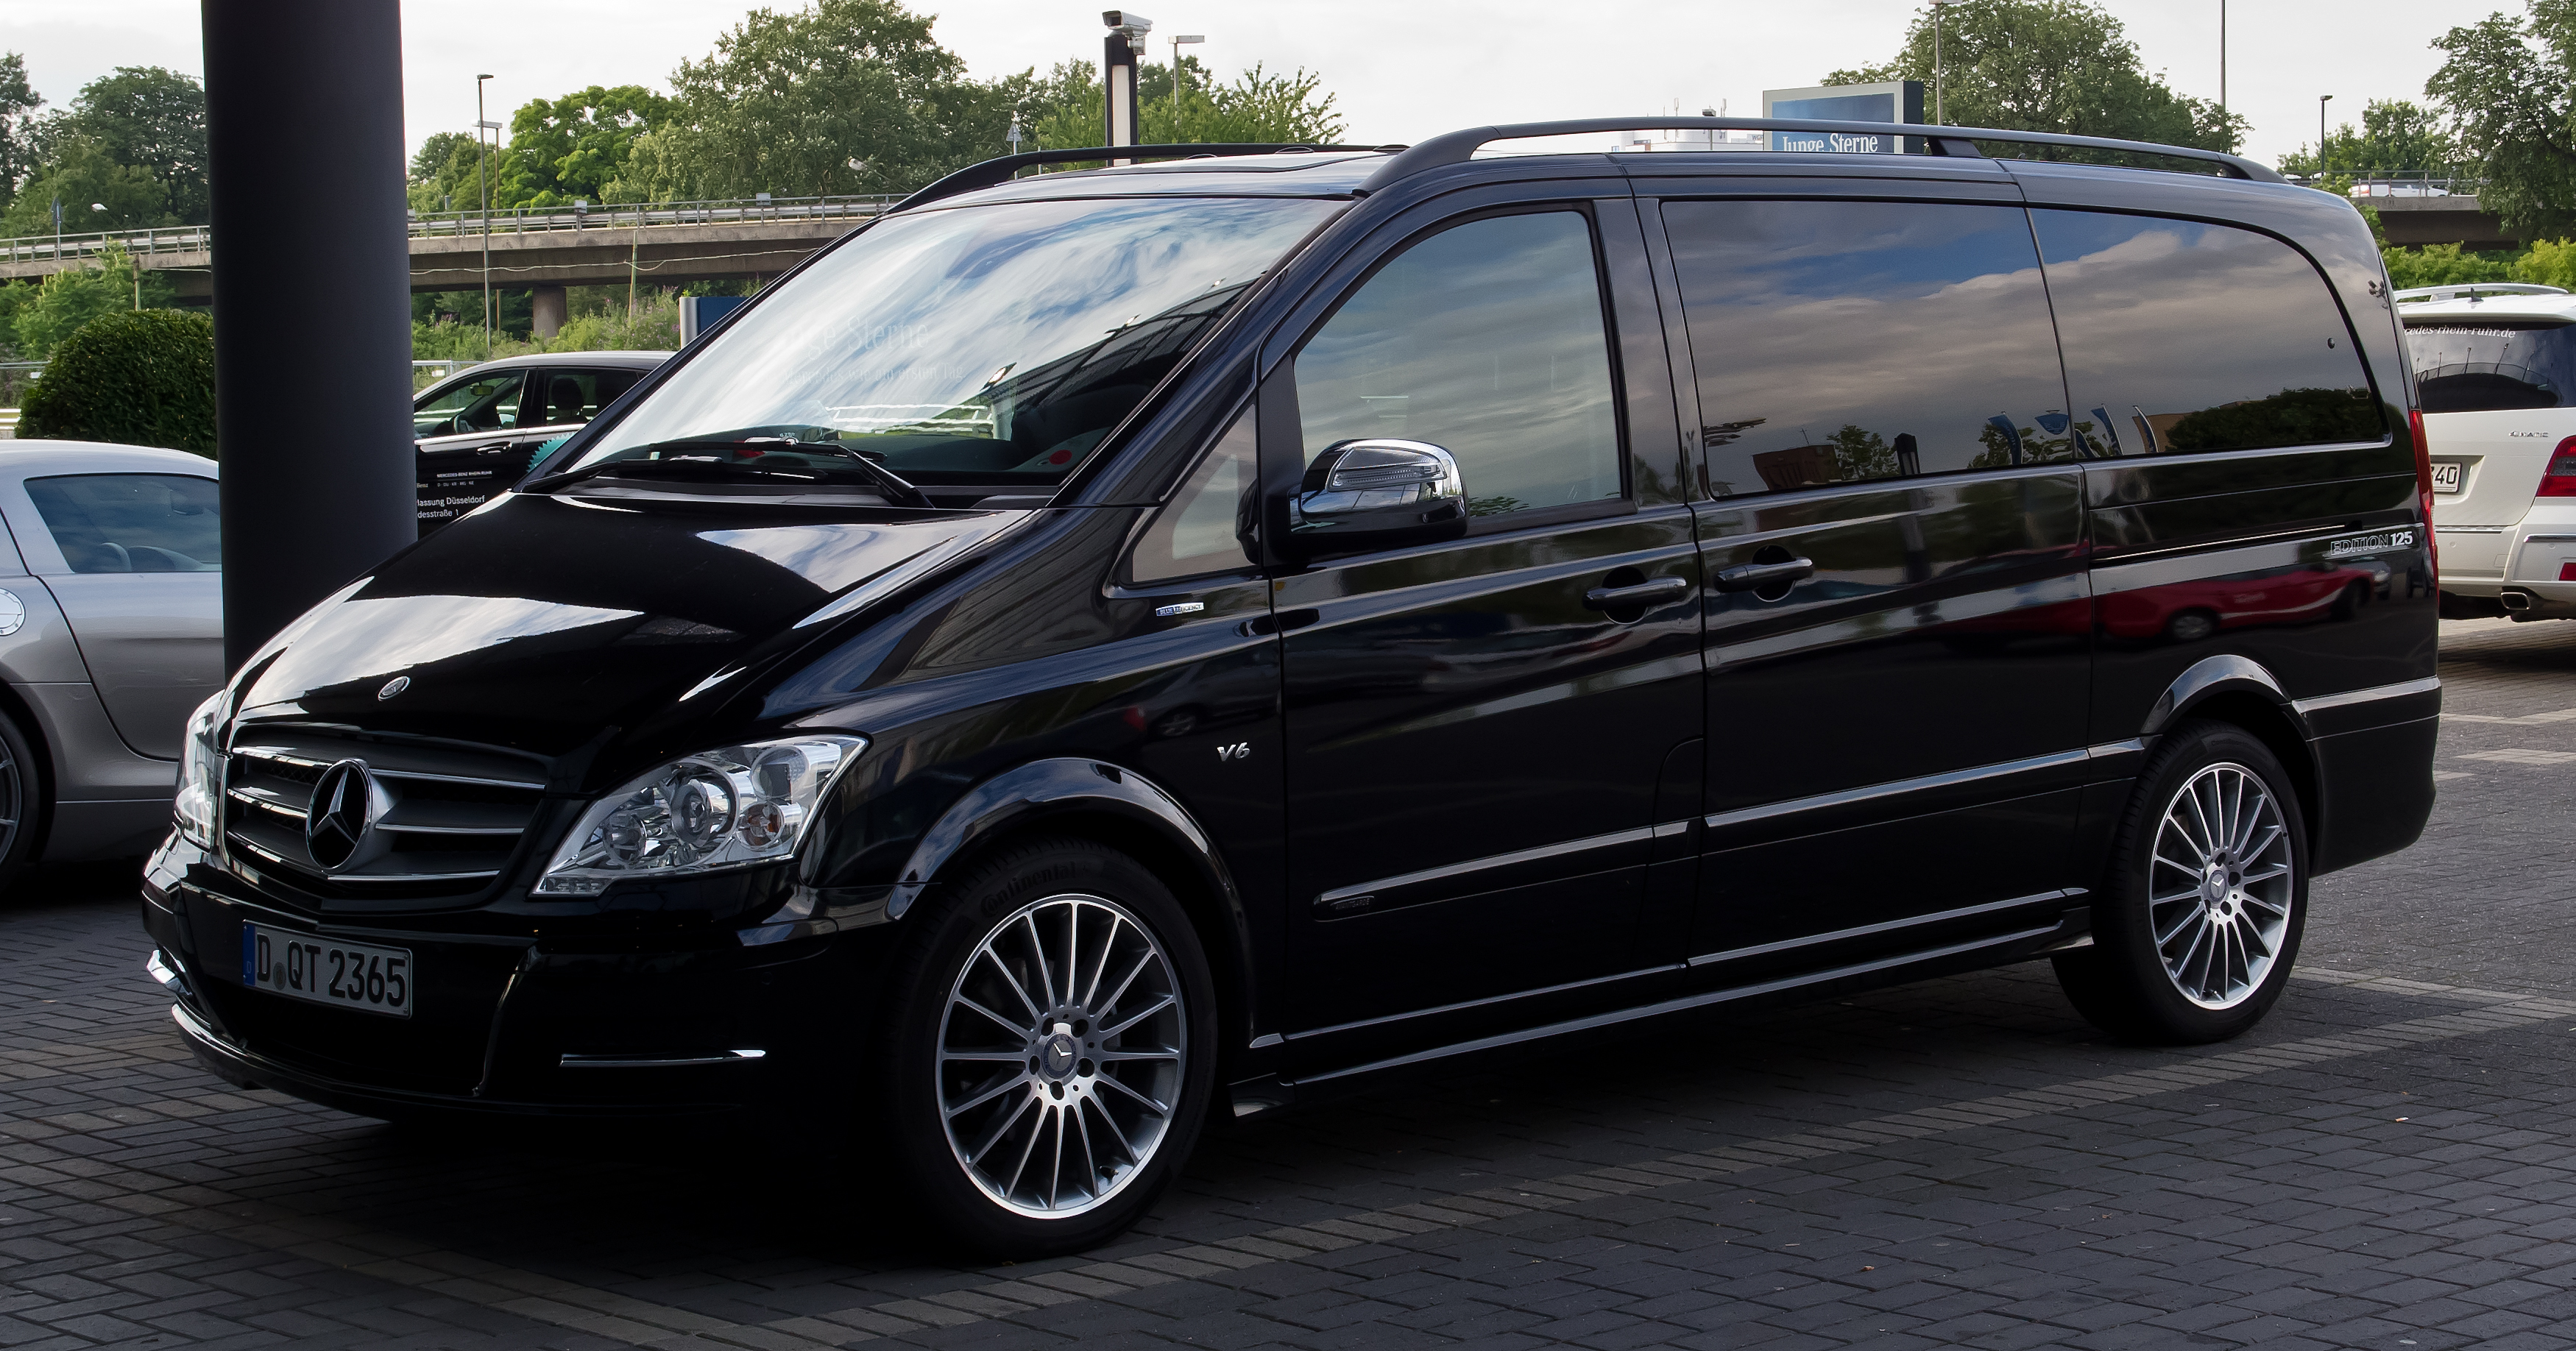 Viano 3 0 V6 Chauffeur Service Cars Uk Kensington And Chelsea